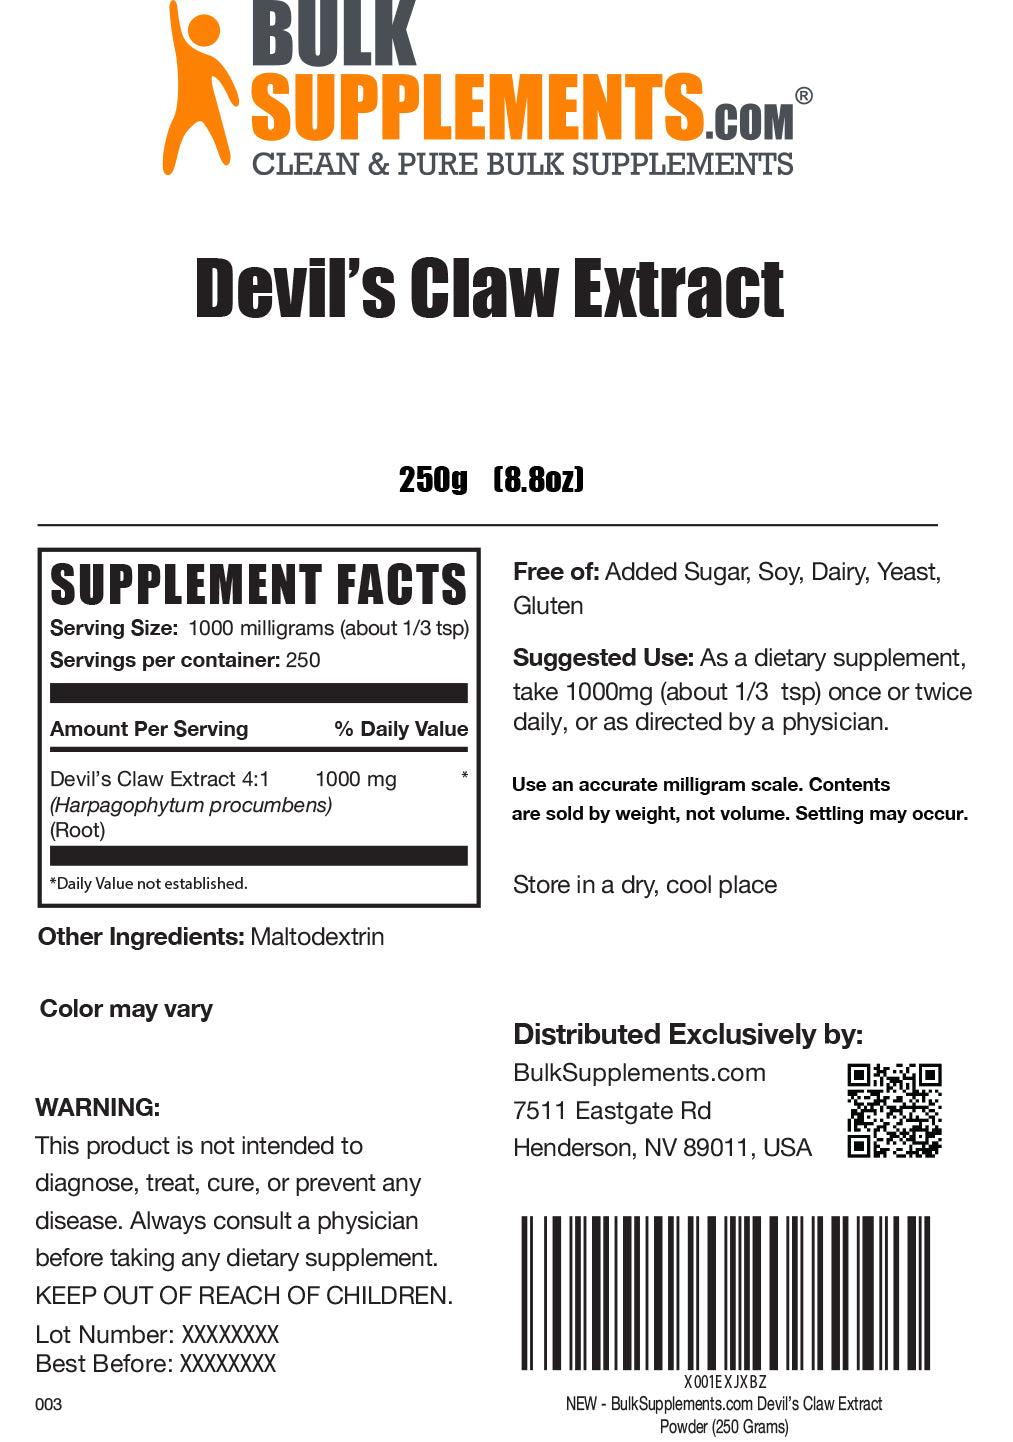 Devil's Claw Extract powder label 250g